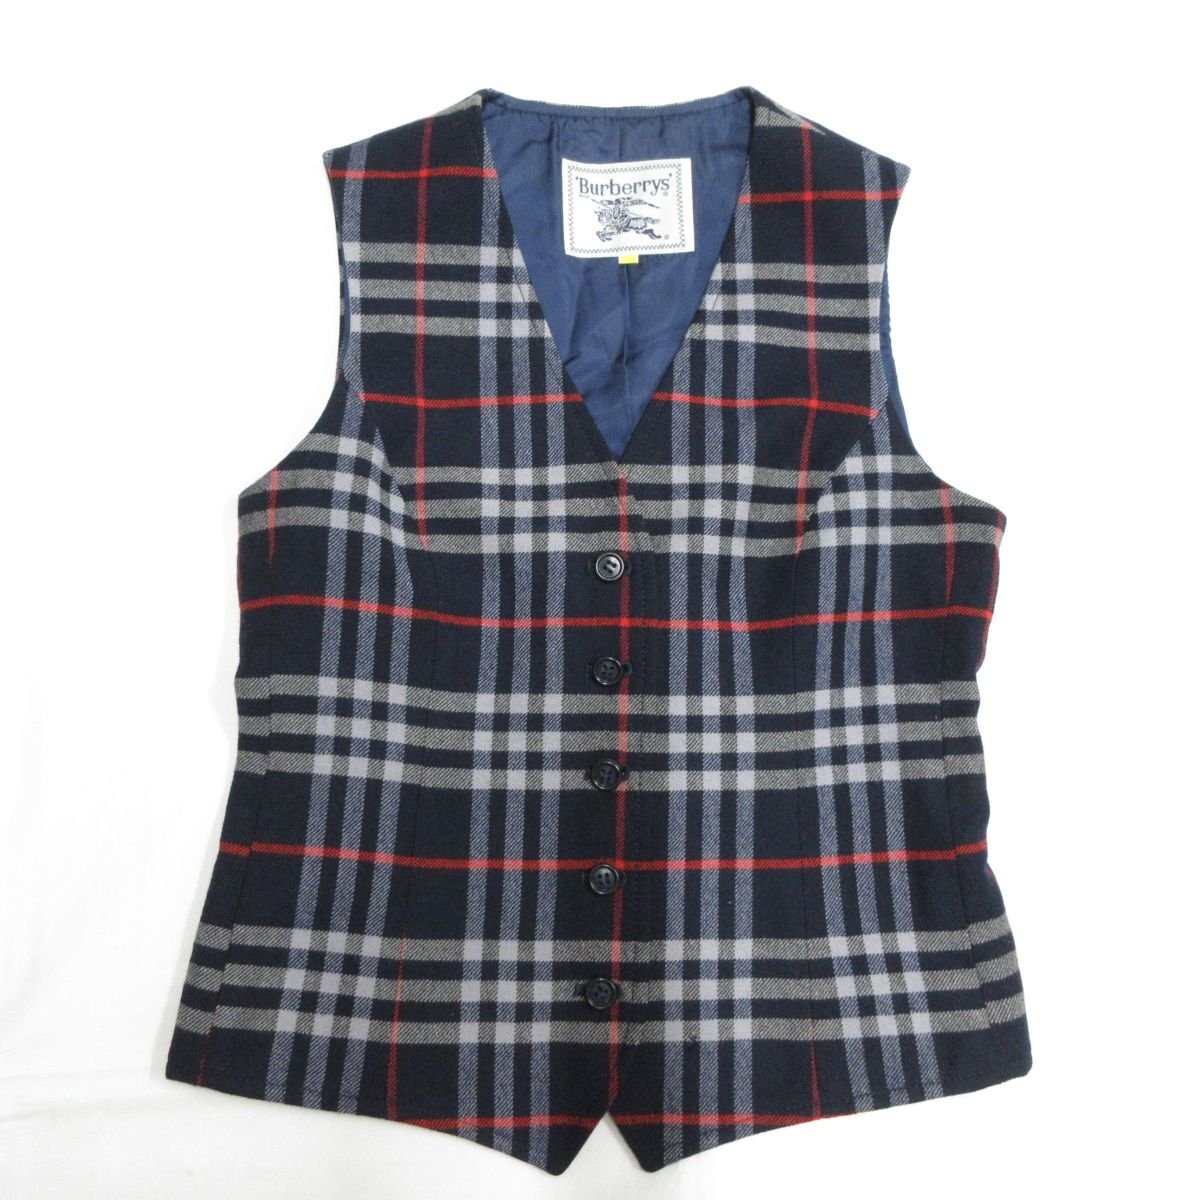  beautiful goods BURBERRY*S Burberry Vintage noba check pattern 5B gilet the best 7A S size corresponding navy × gray × red 